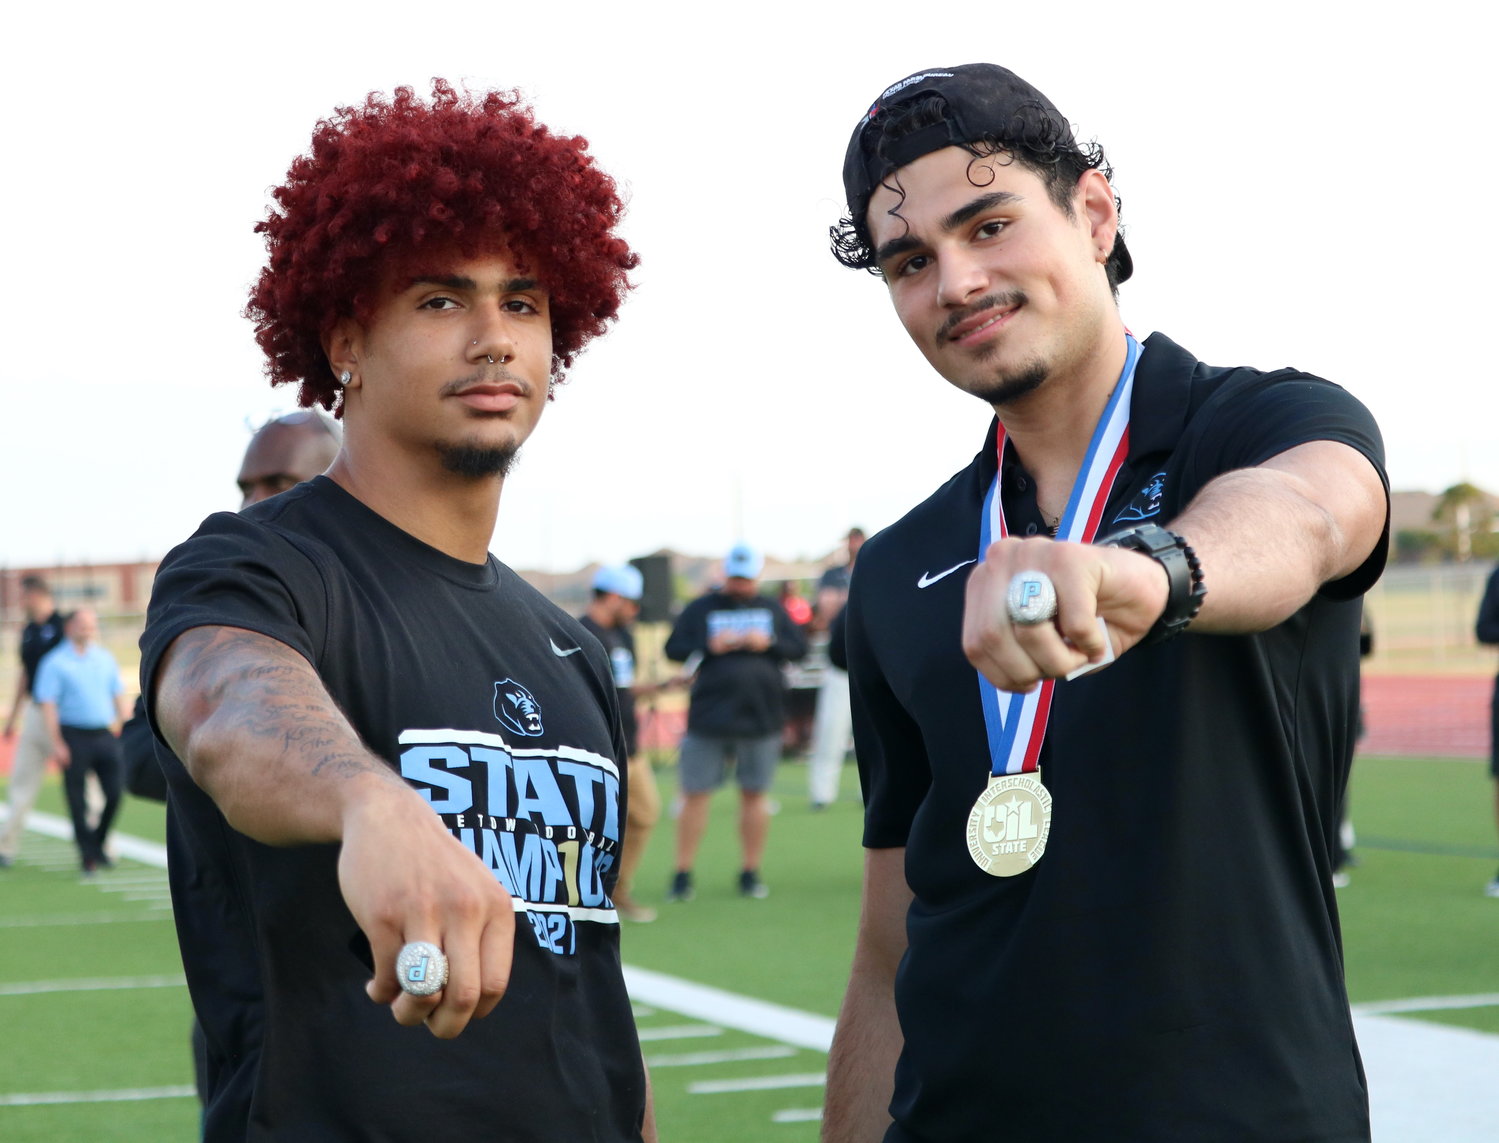 Jacob Brown and Anthony Fuentes show off their championship rings during Thursday’s ring ceremony at Paetow.